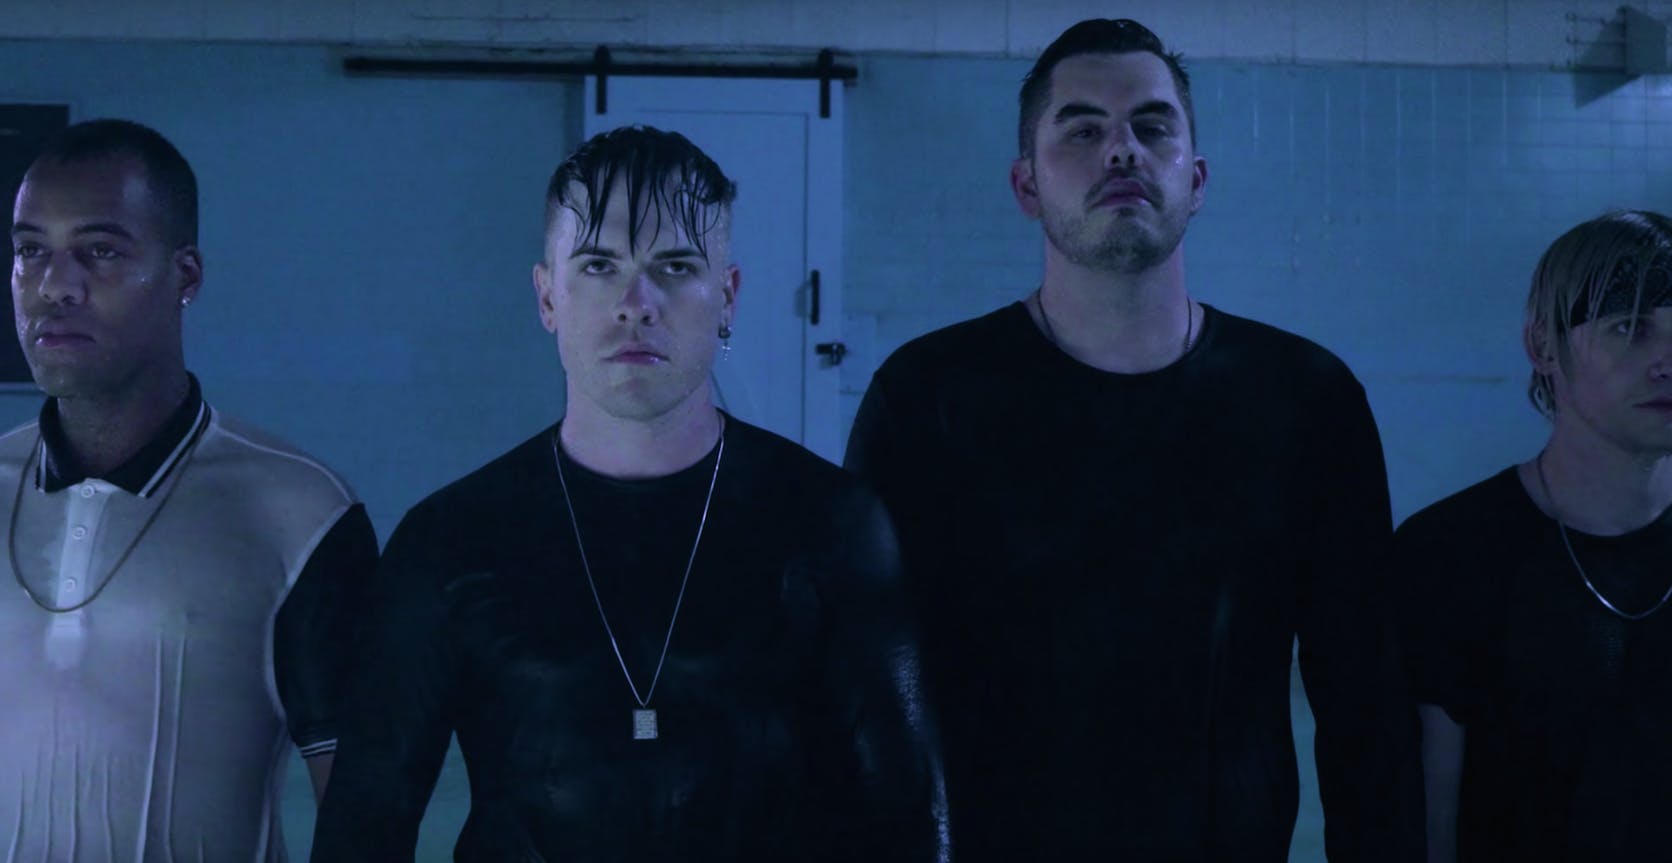 Set It Off Sign To Fearless And Release New Song, Killer In The Mirror